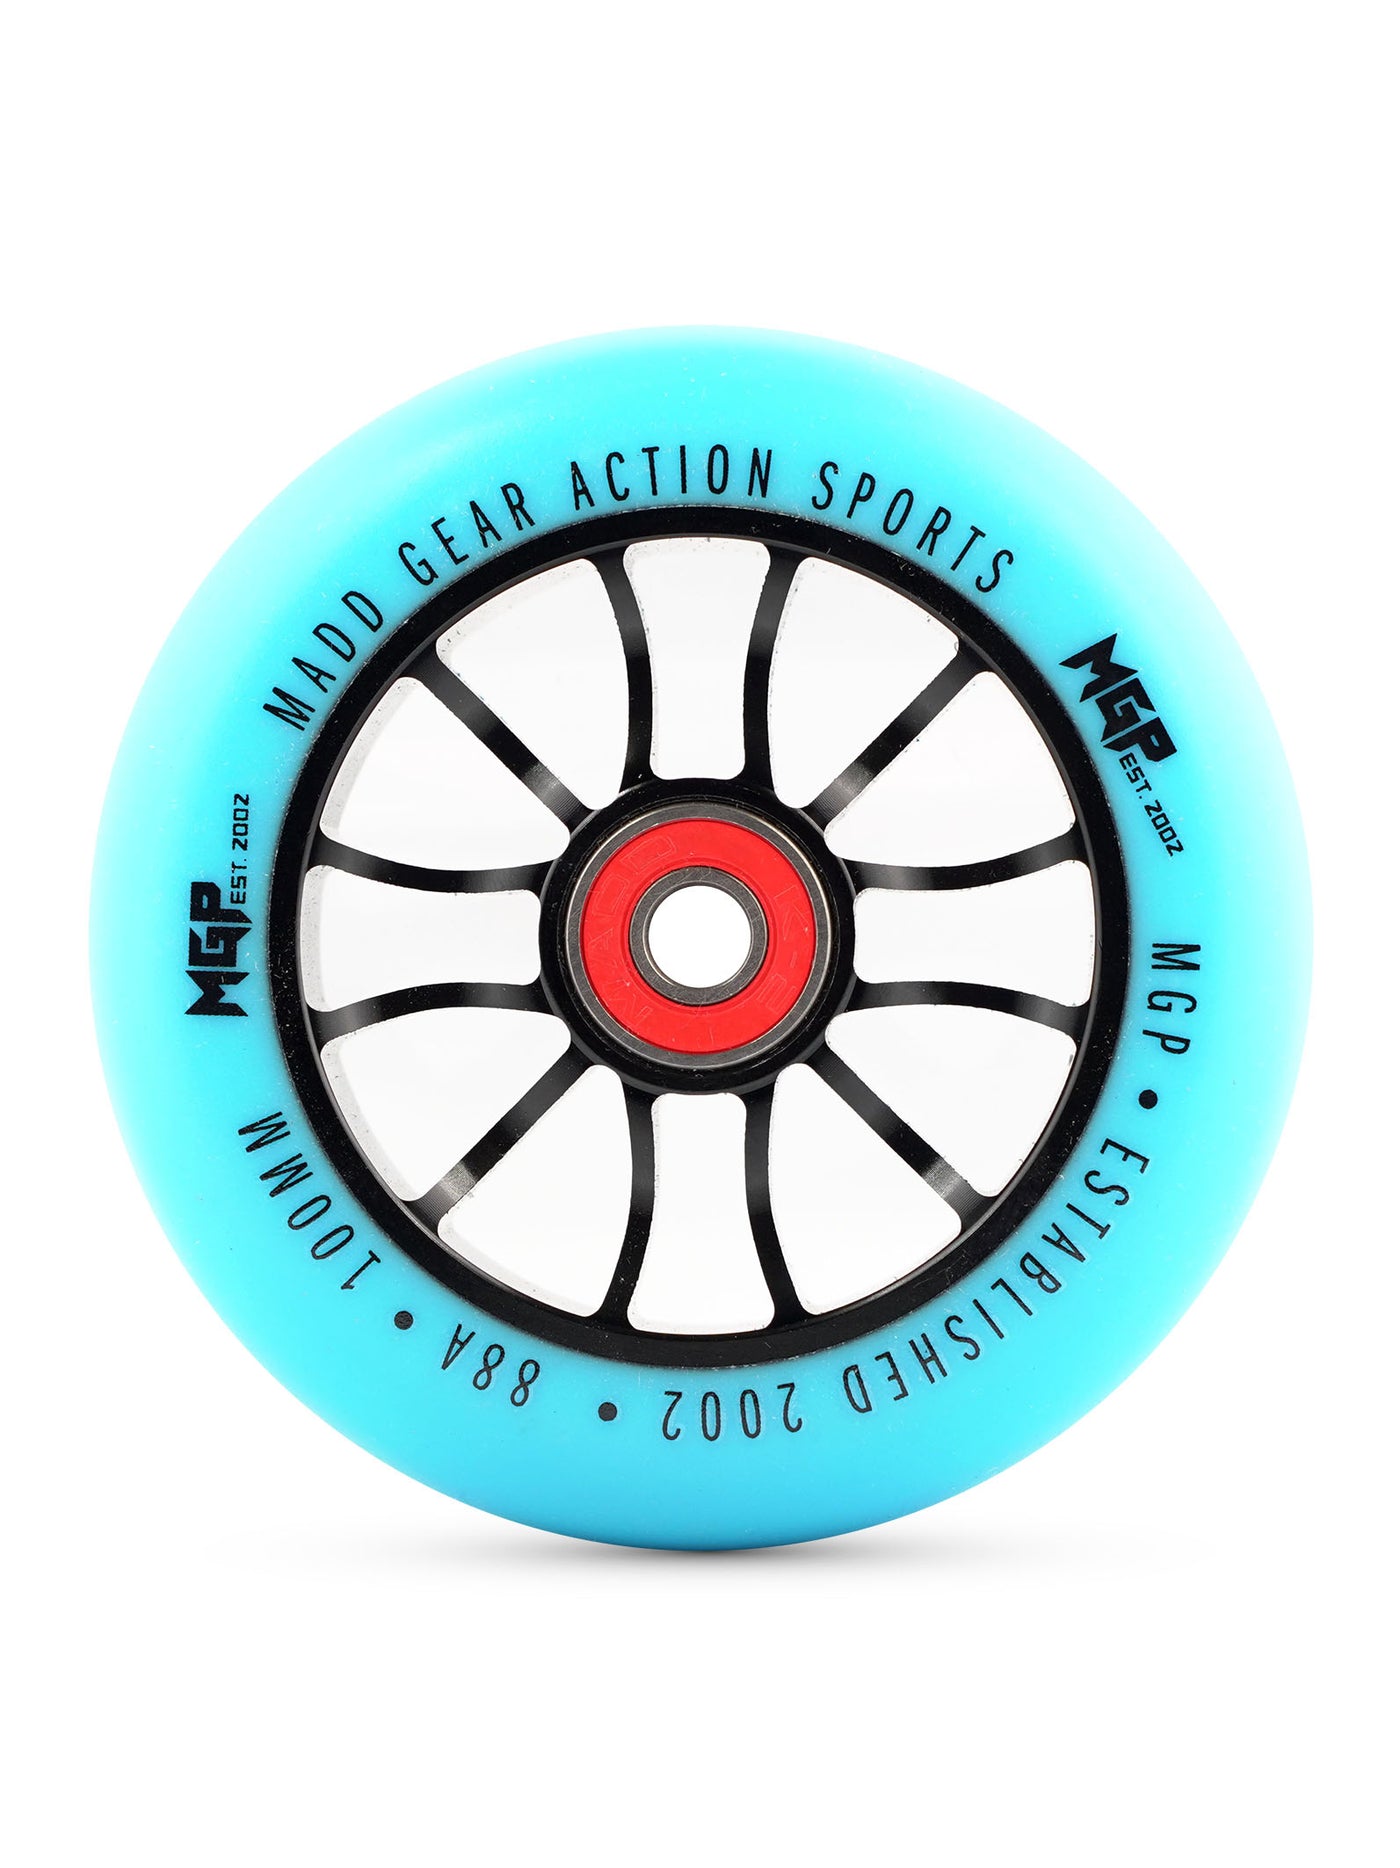 mfx madd gear mgp pro scooter wheel stunt trick alloy metal core replacement abec-9 blue black